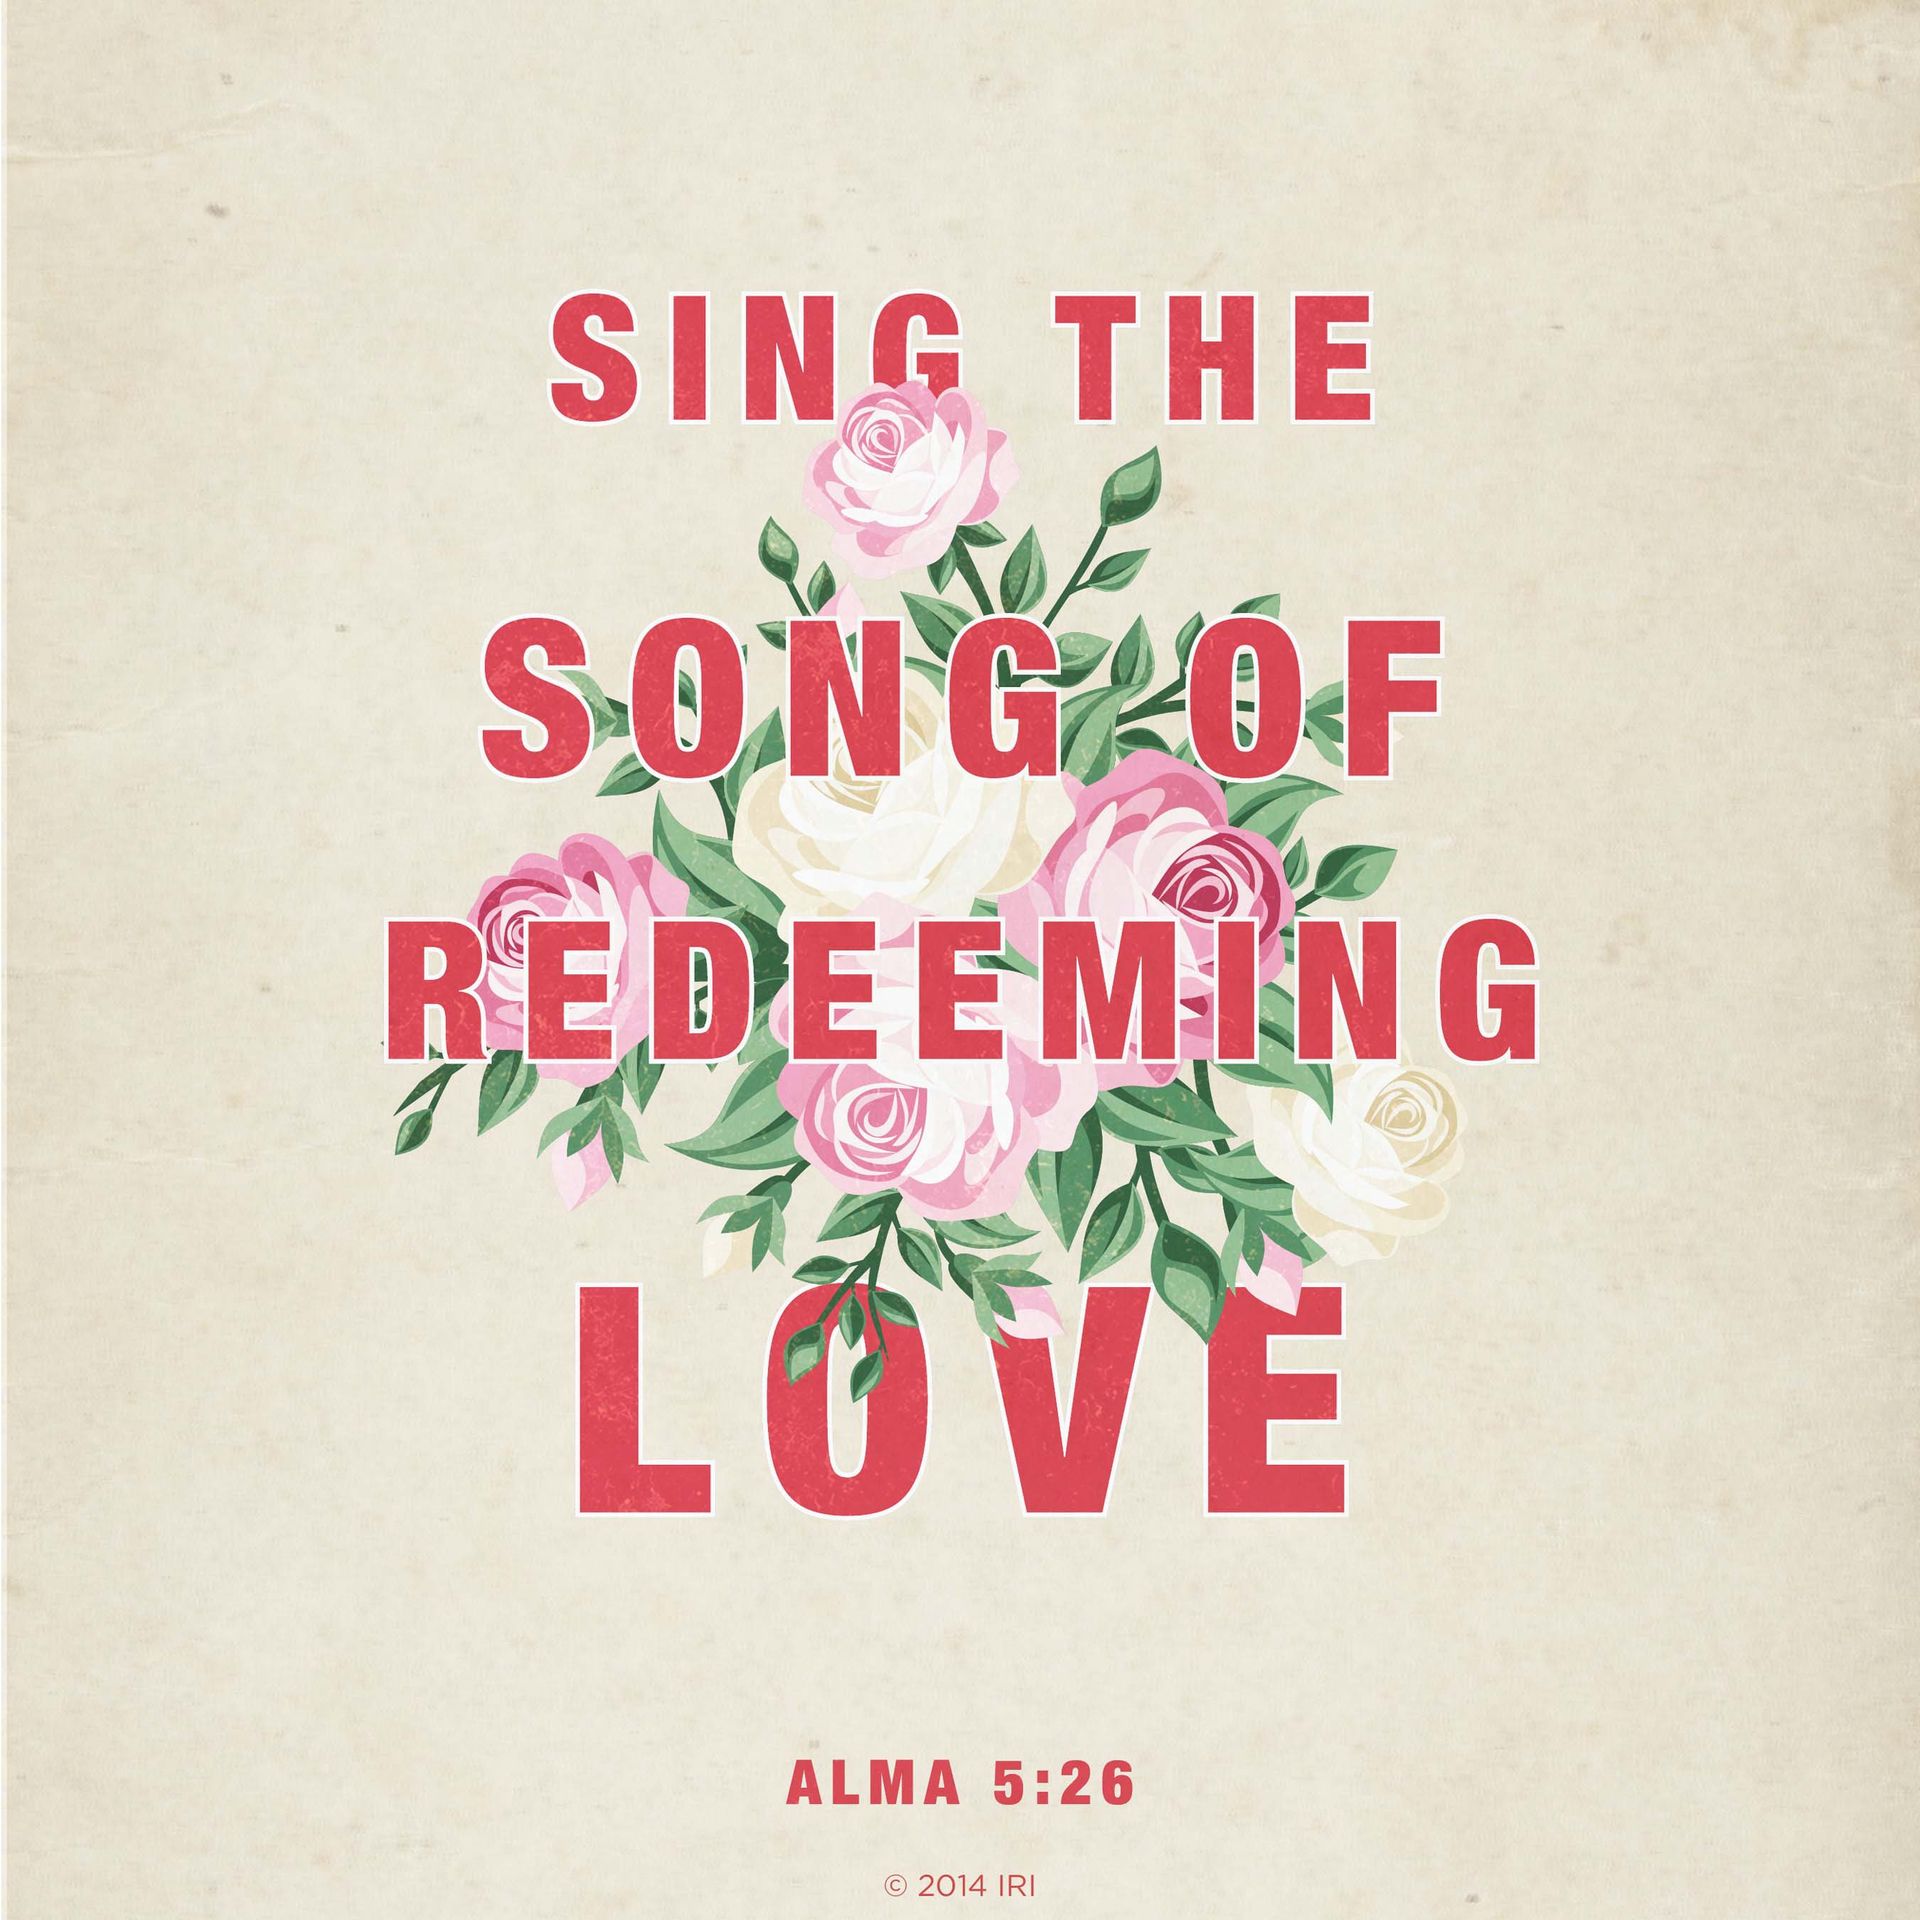 “Sing the song of redeeming love.”—Alma 5:26